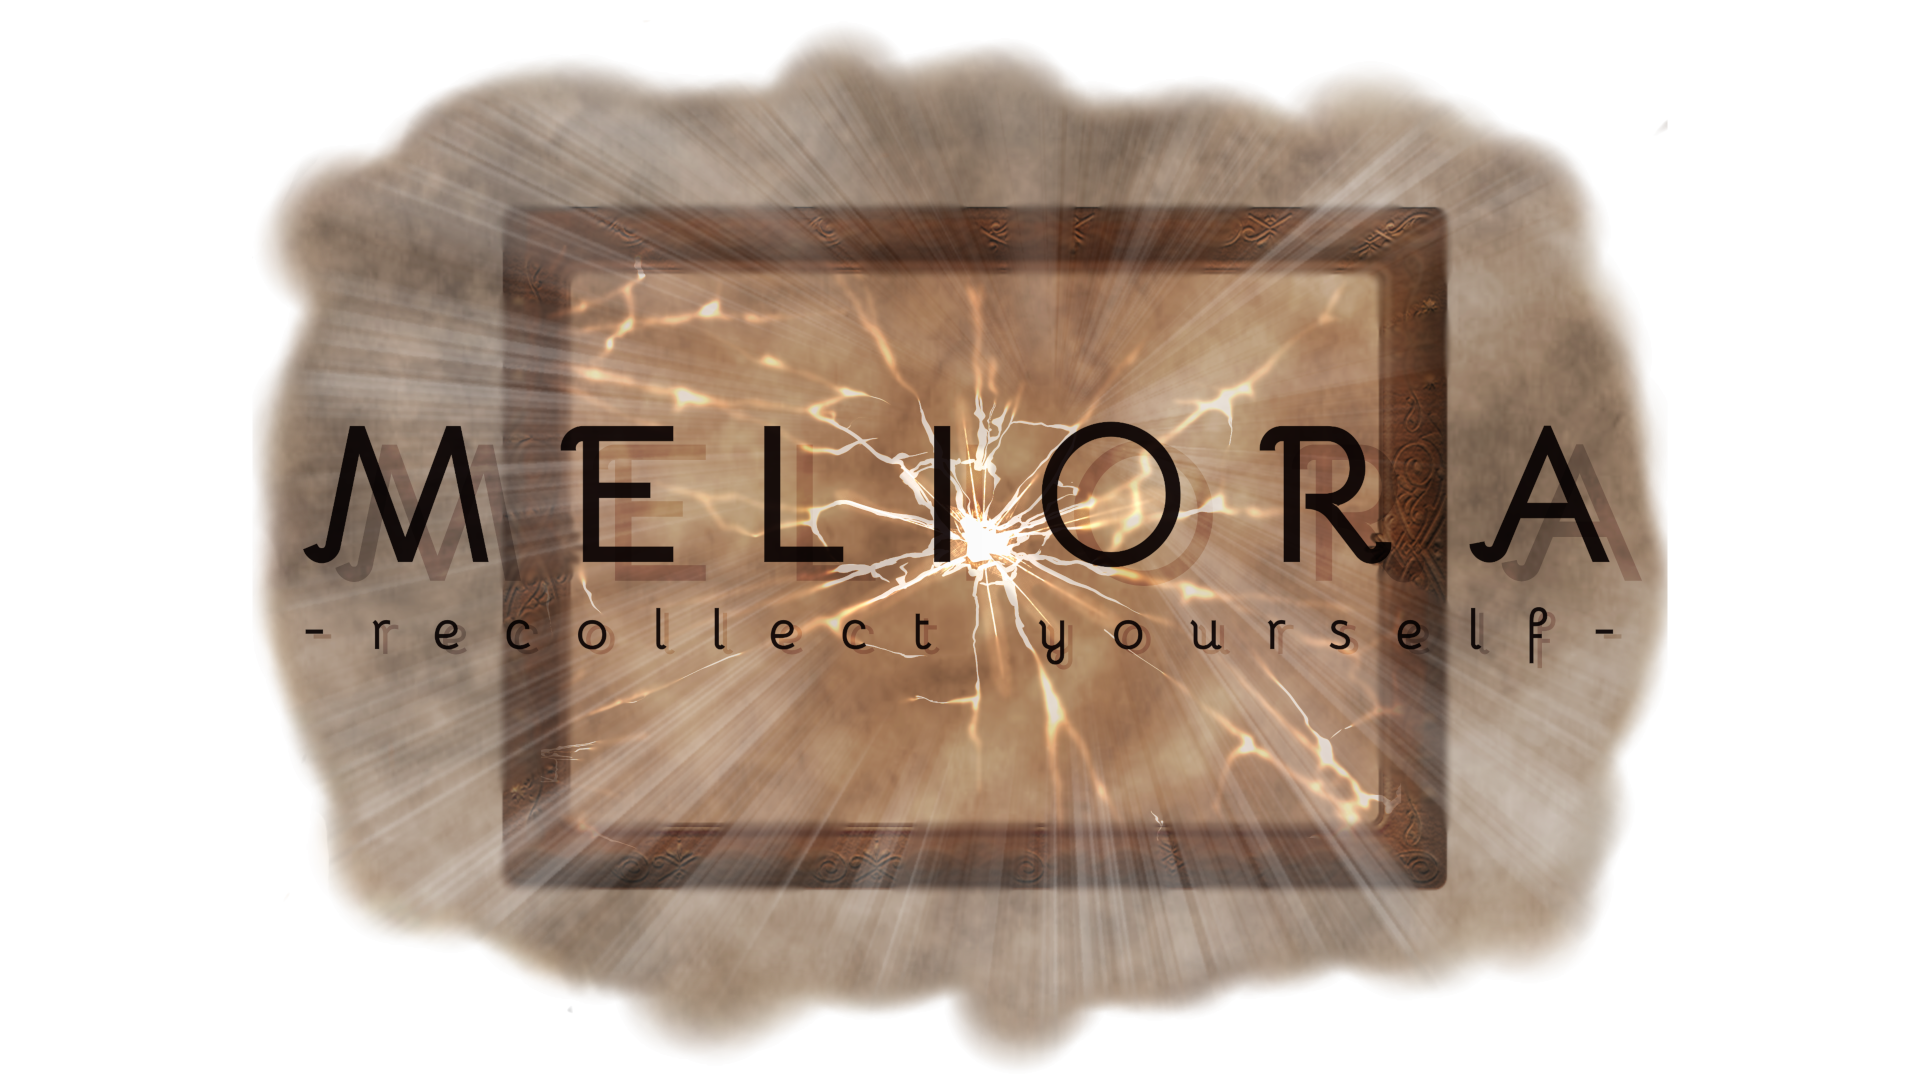 Meliora - recollect yourself -